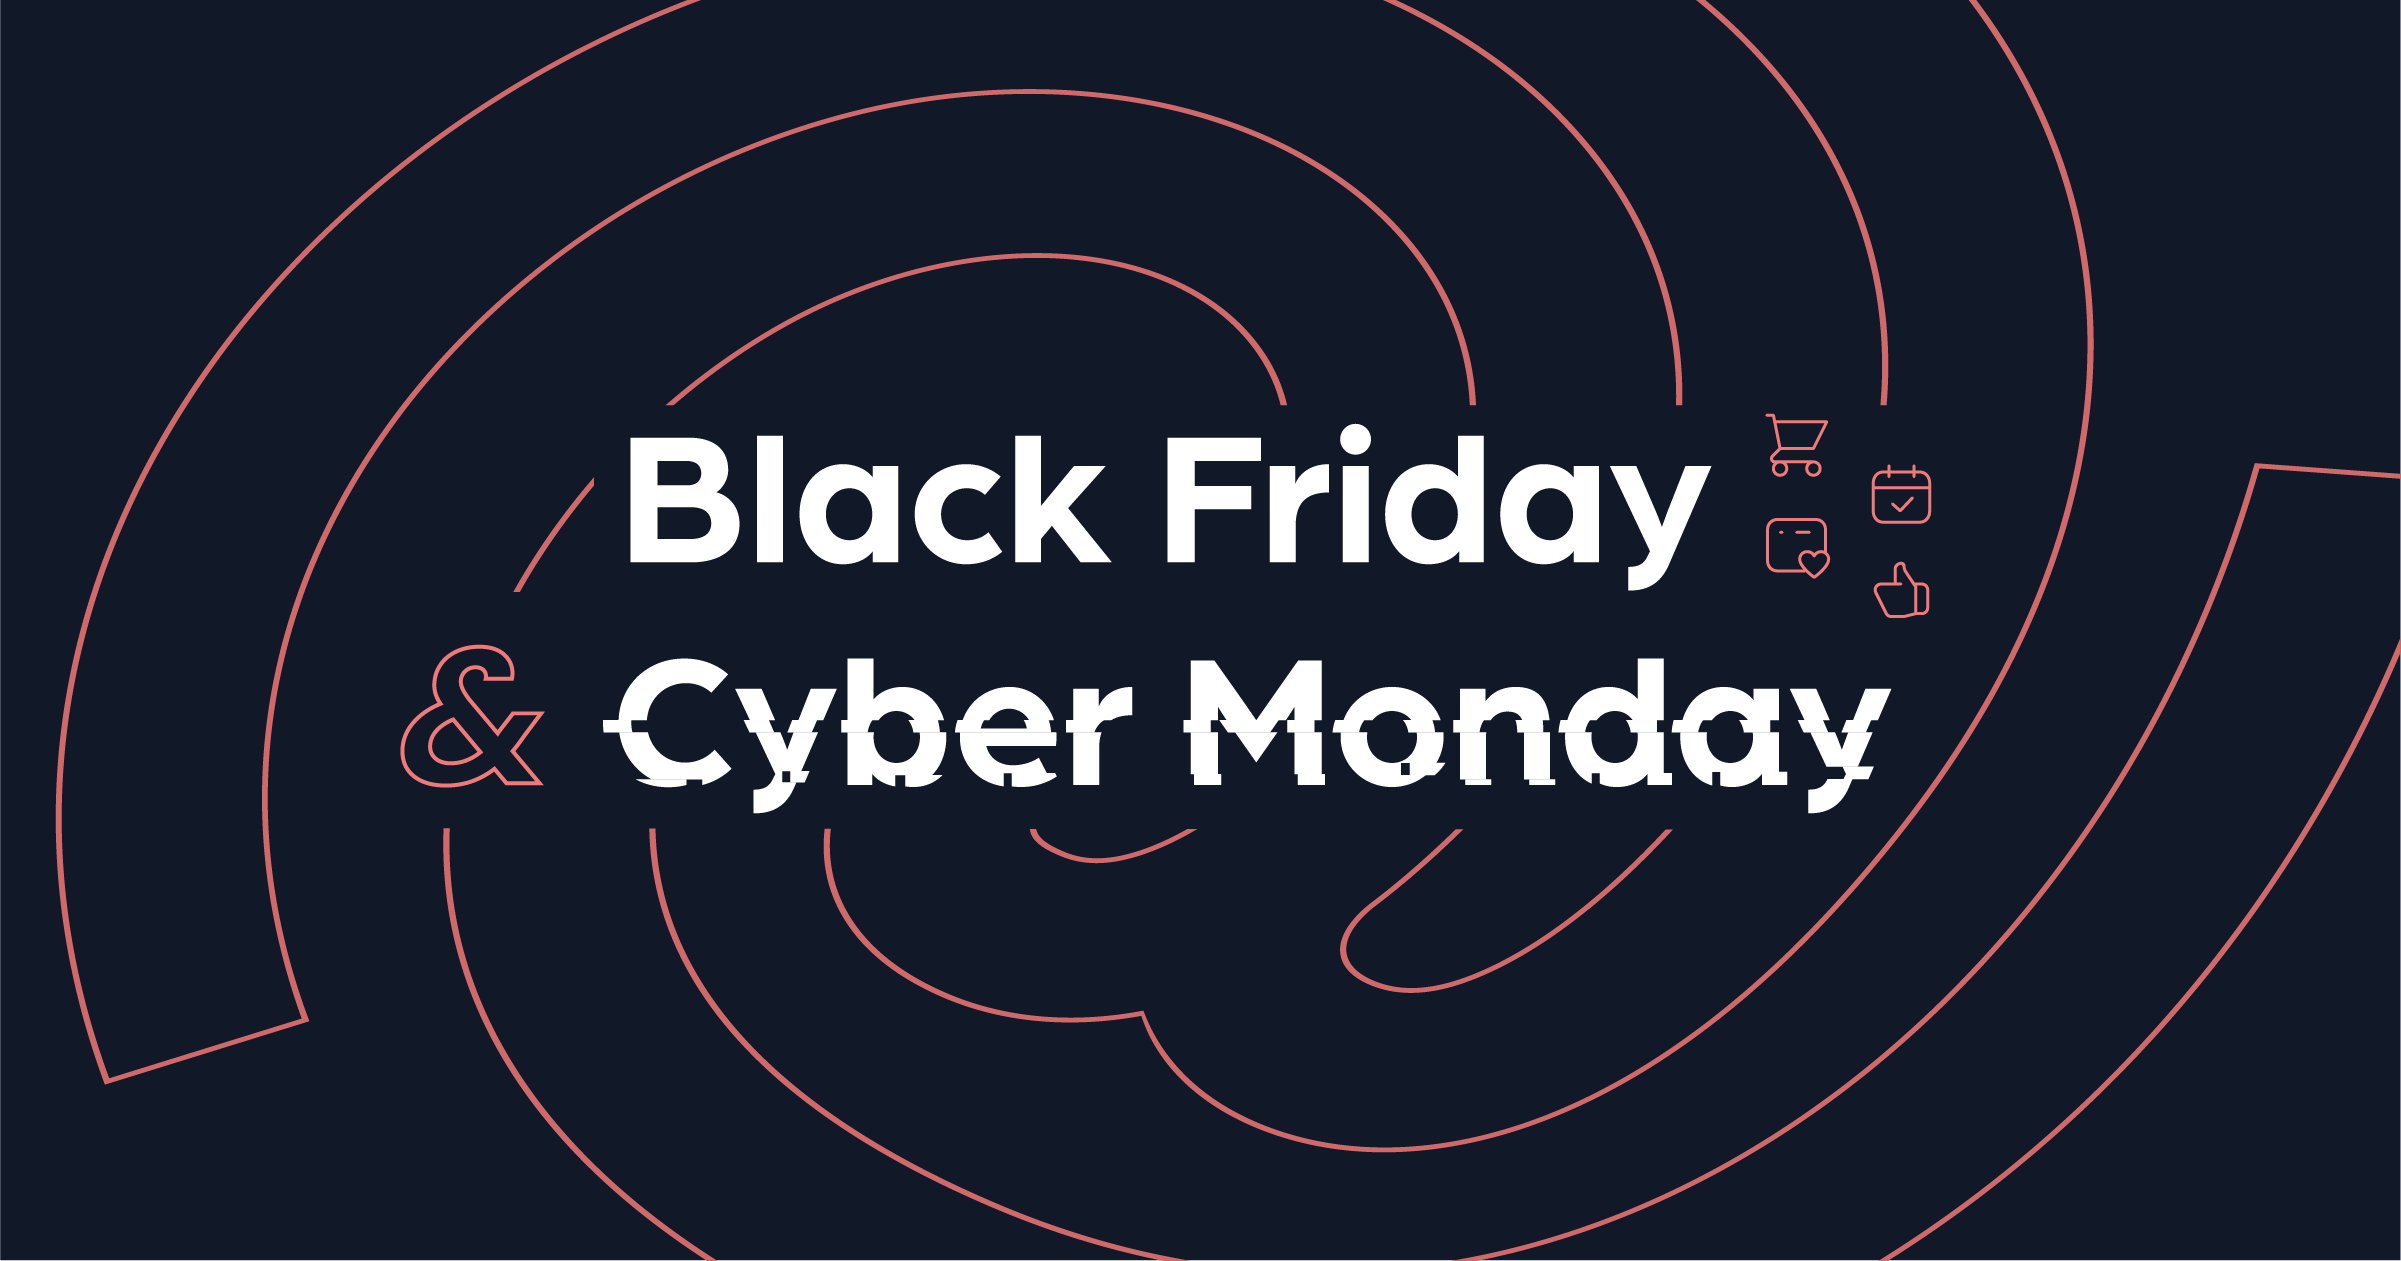 4 eCommerce marketing tips for Black Friday and Cyber Monday